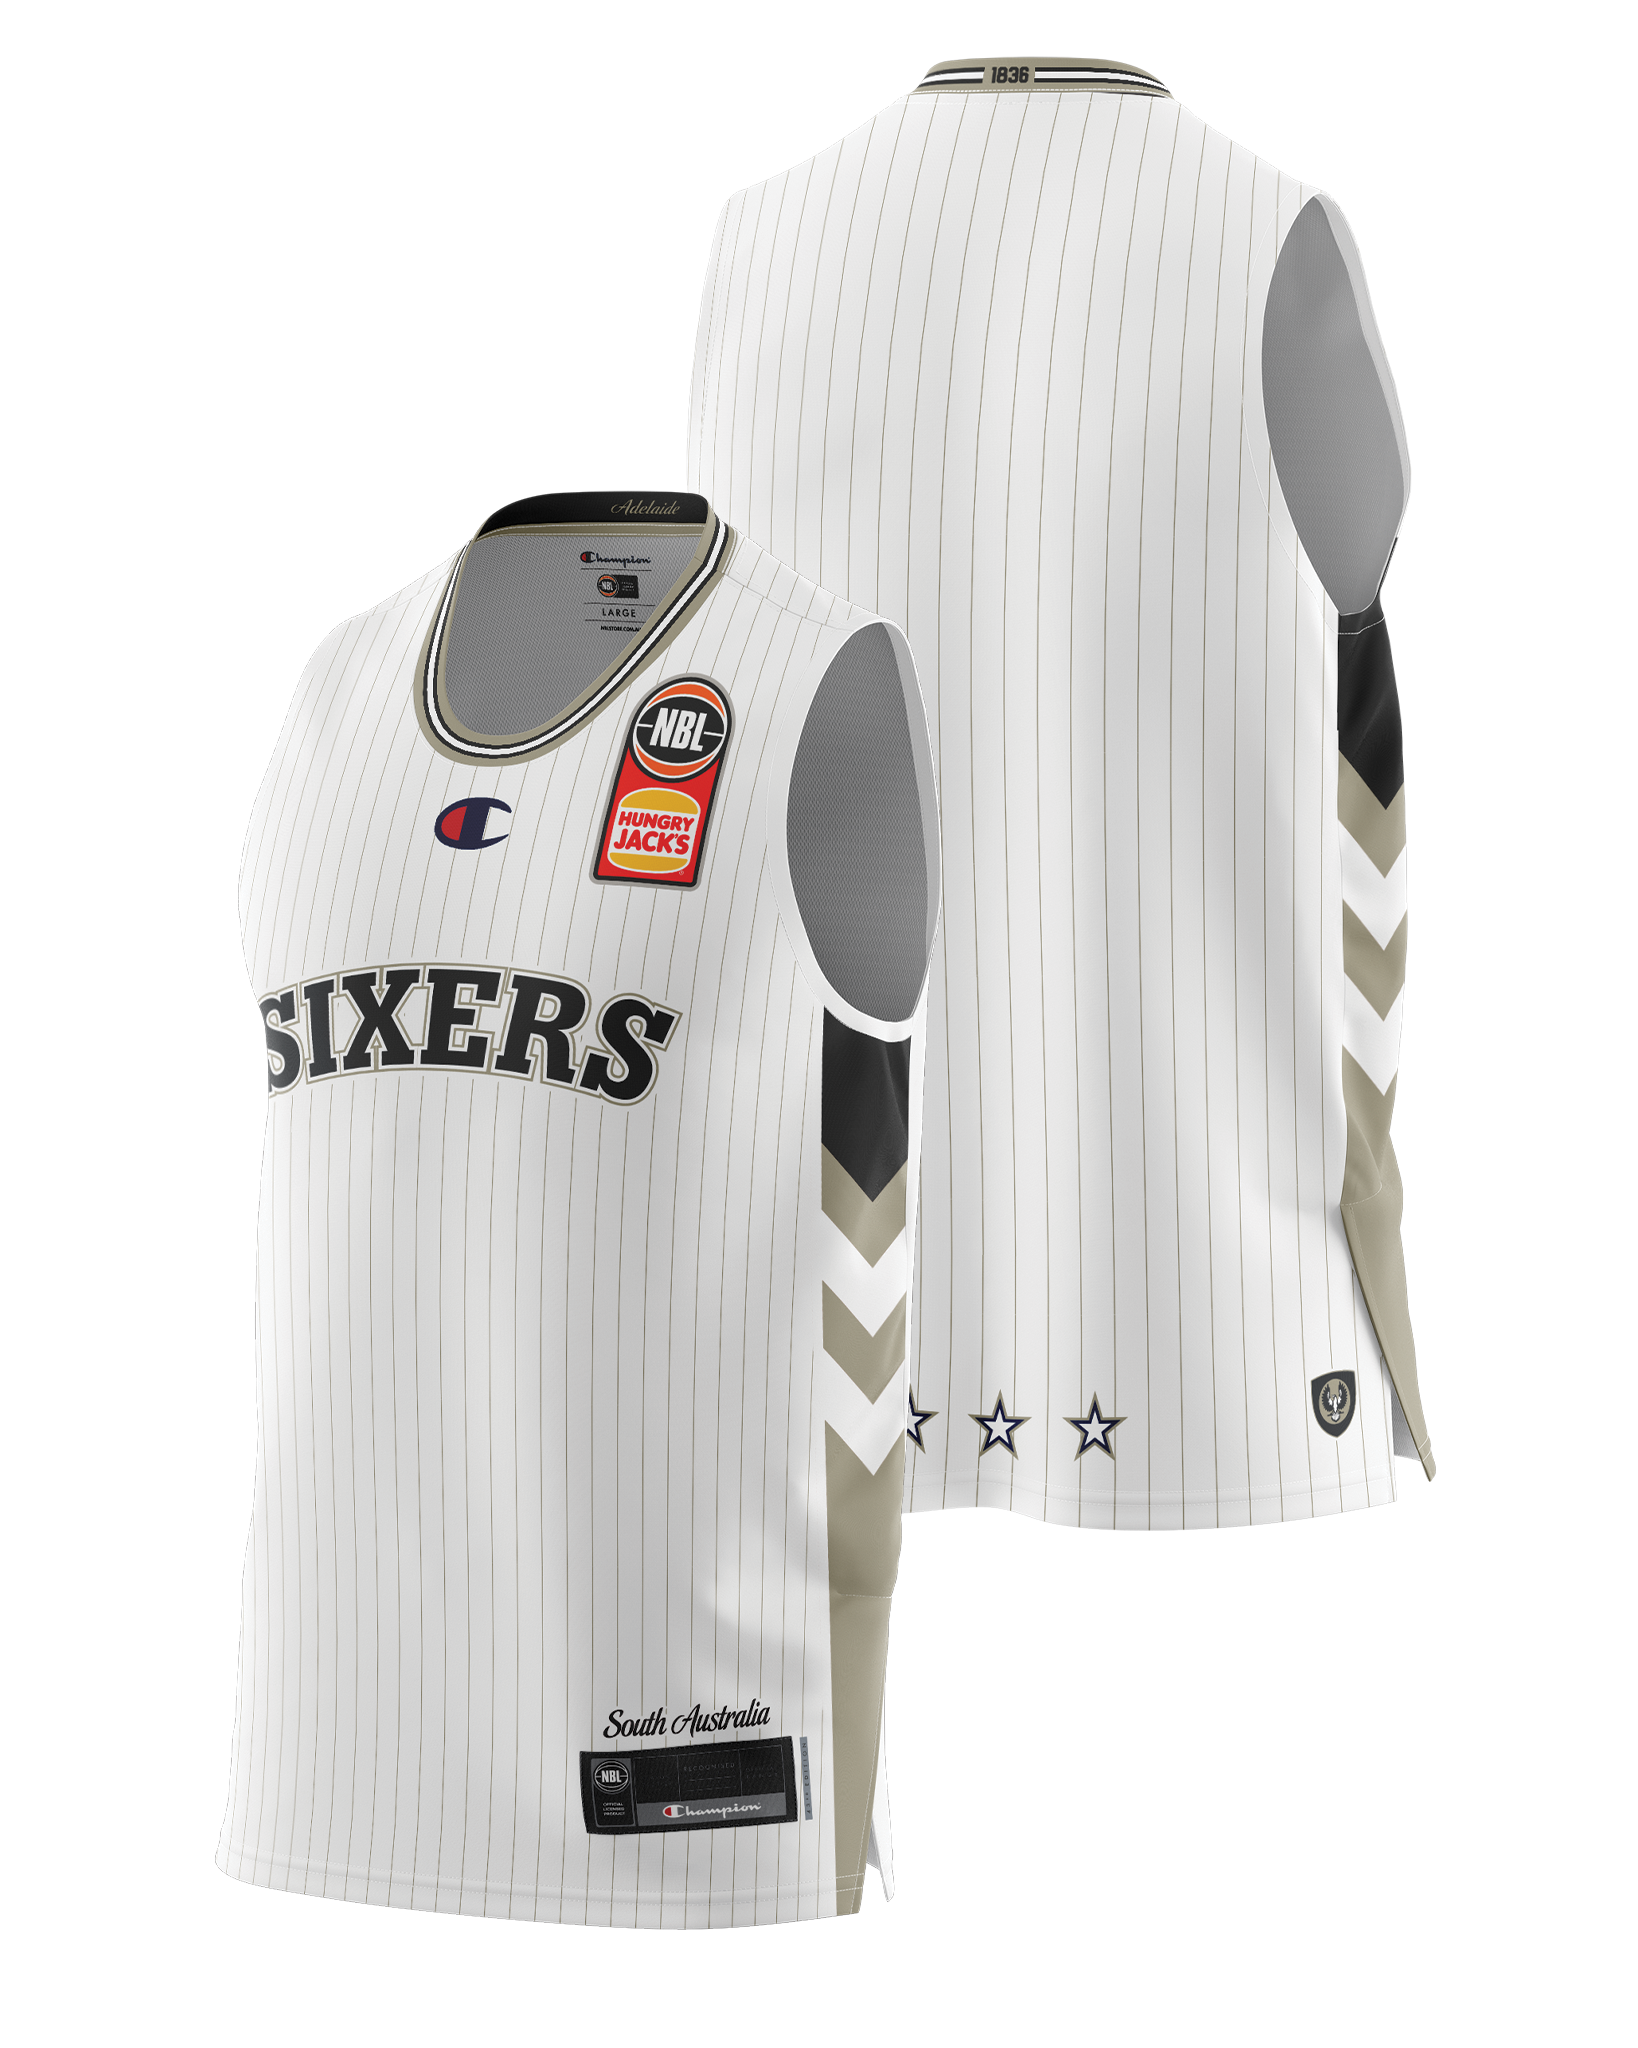 Adelaide 36ers 2021 Authentic Away Youth Jersey - Adelaide 36ers